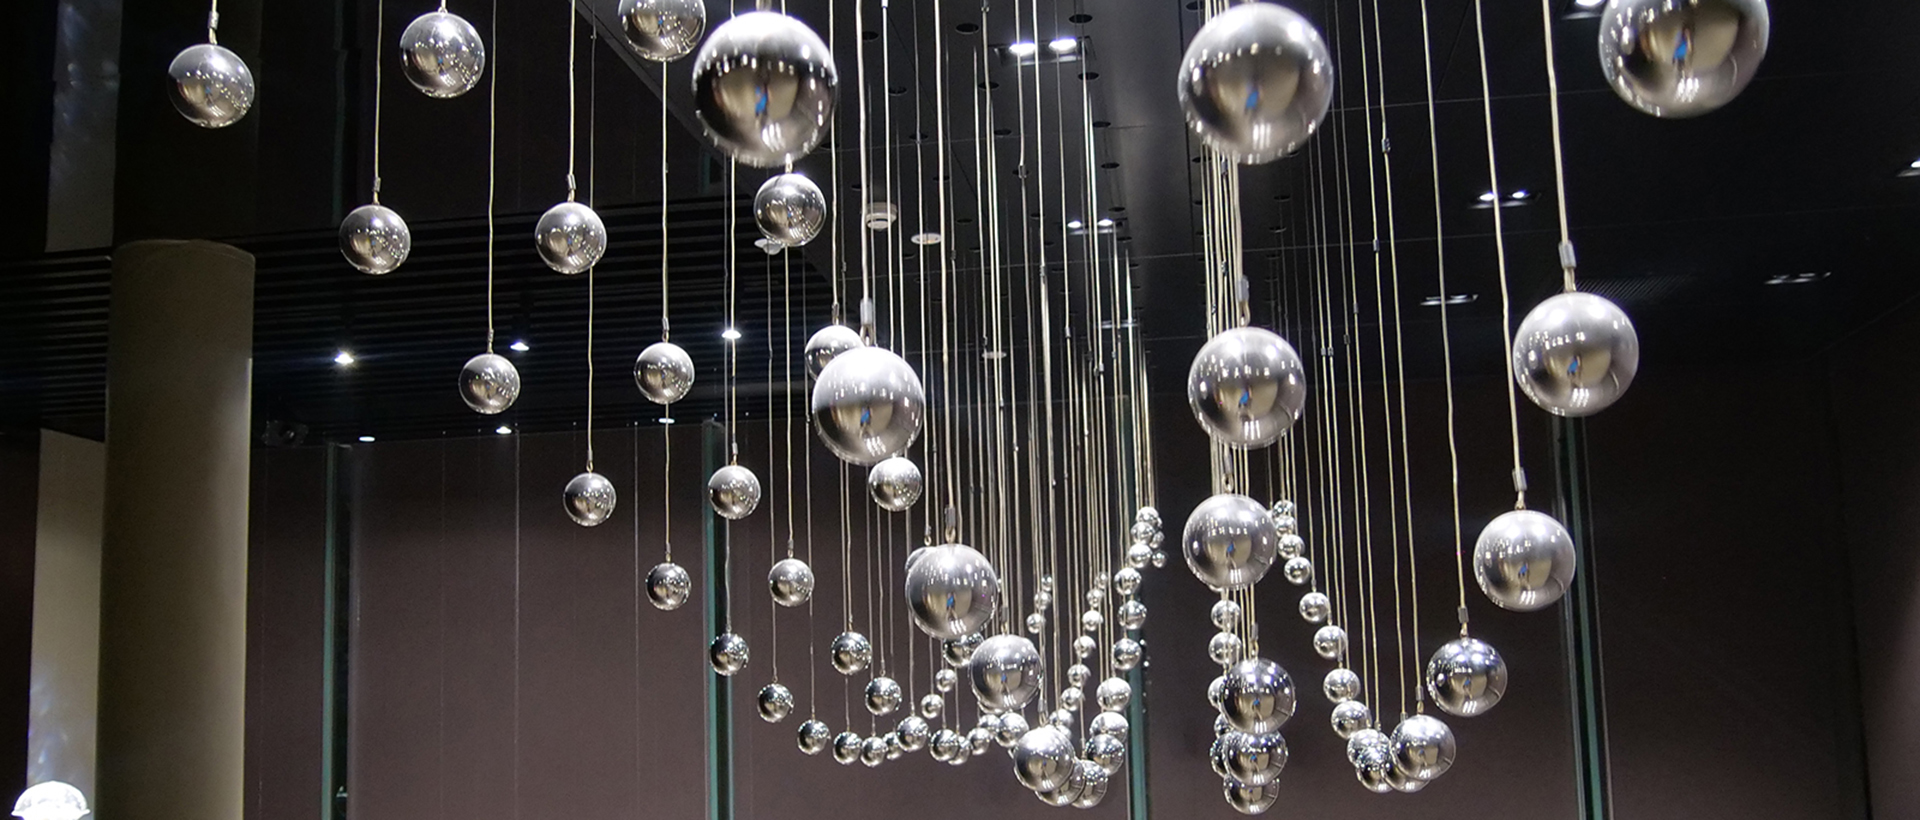 132 sets Kinetic Sculpture balls used in Guangzhou Poly Exhibition Hall 2020 (2)